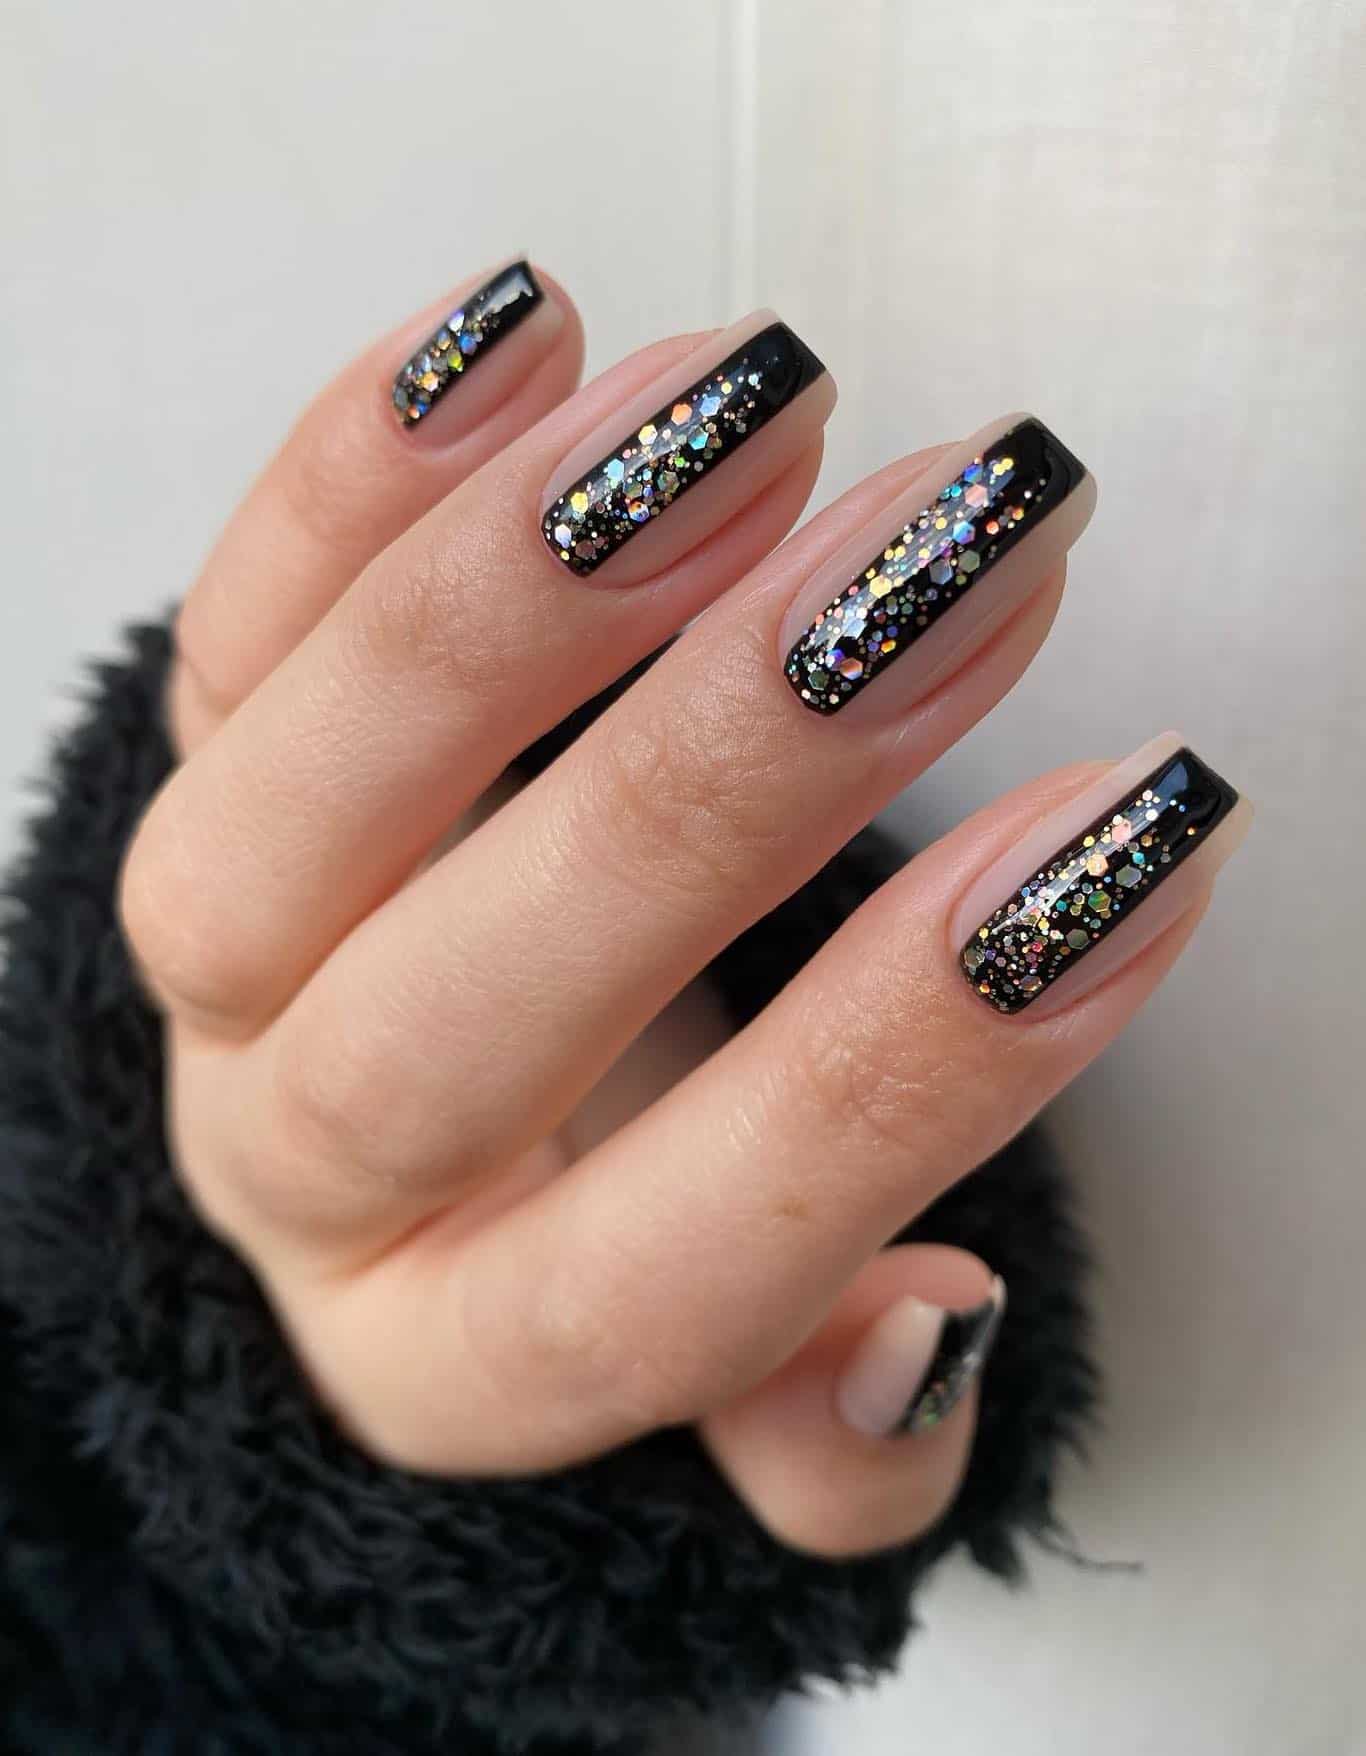 Short square nude nails with vertical black and glitter stripes